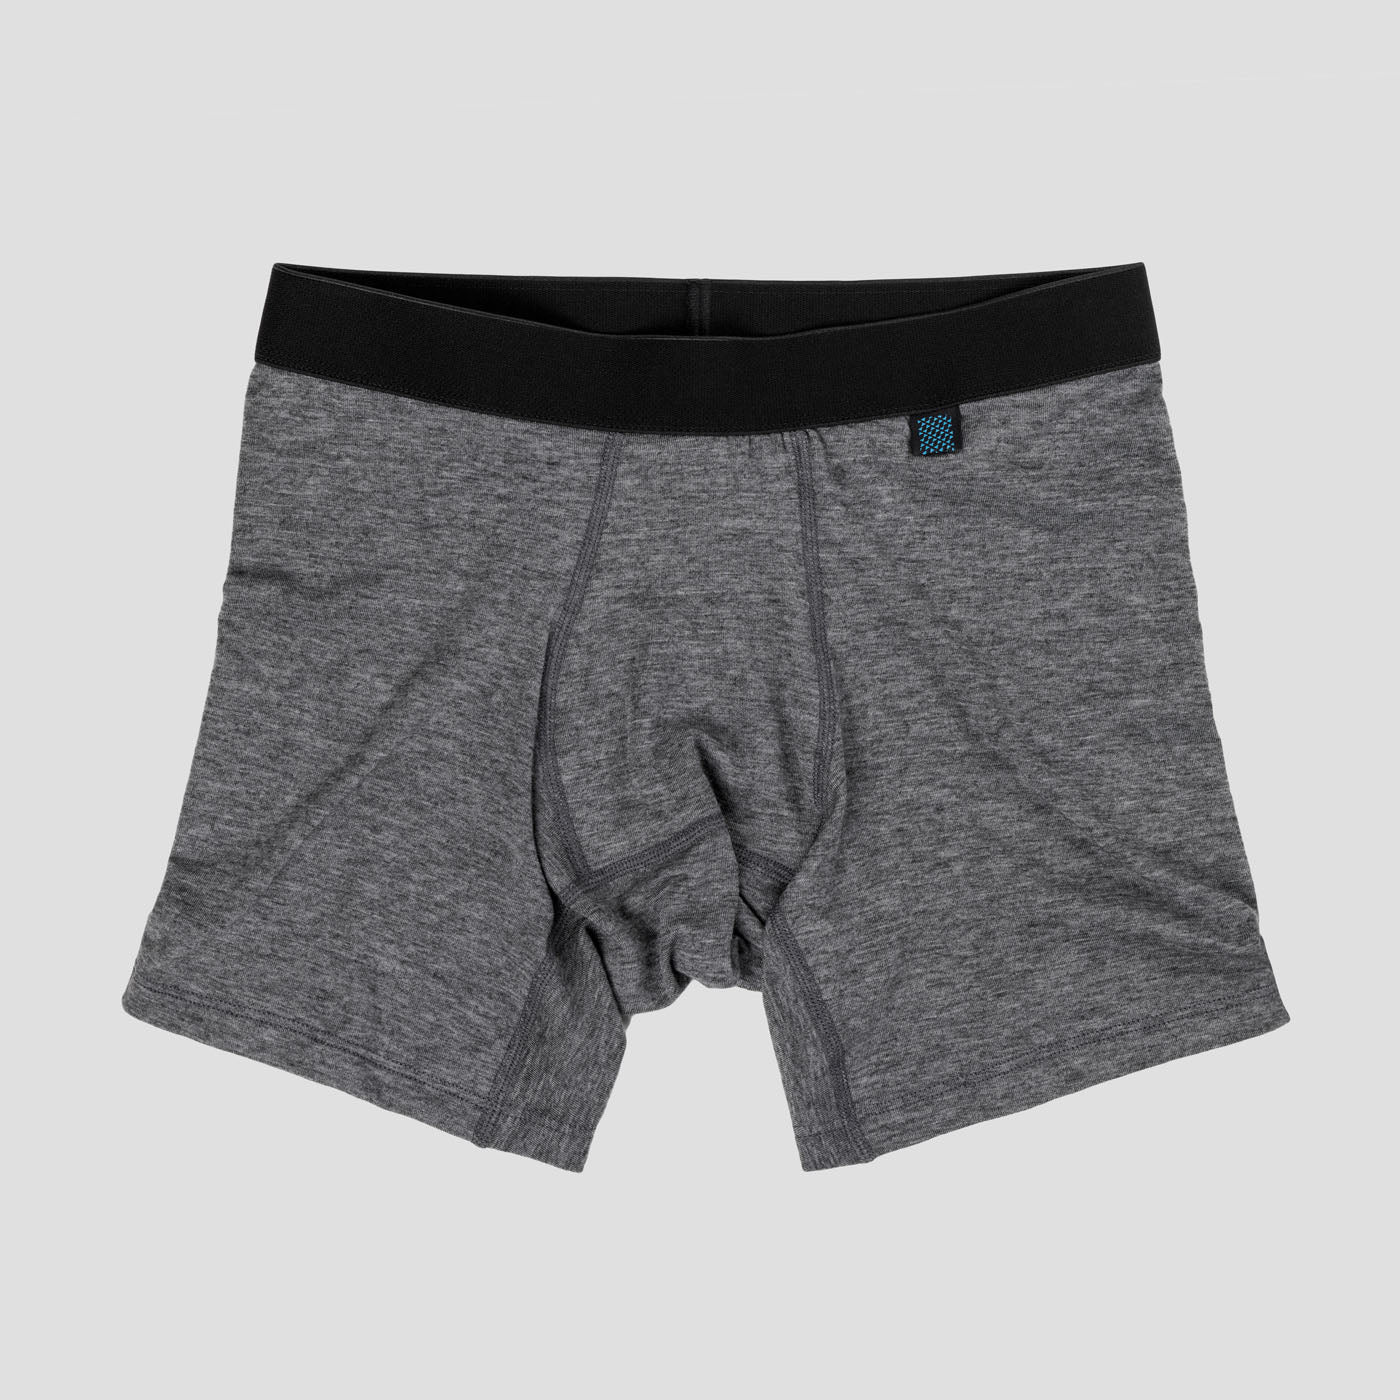 Men's Merino Boxer Briefs - Charcoal (Limited Sizes) – Ornot